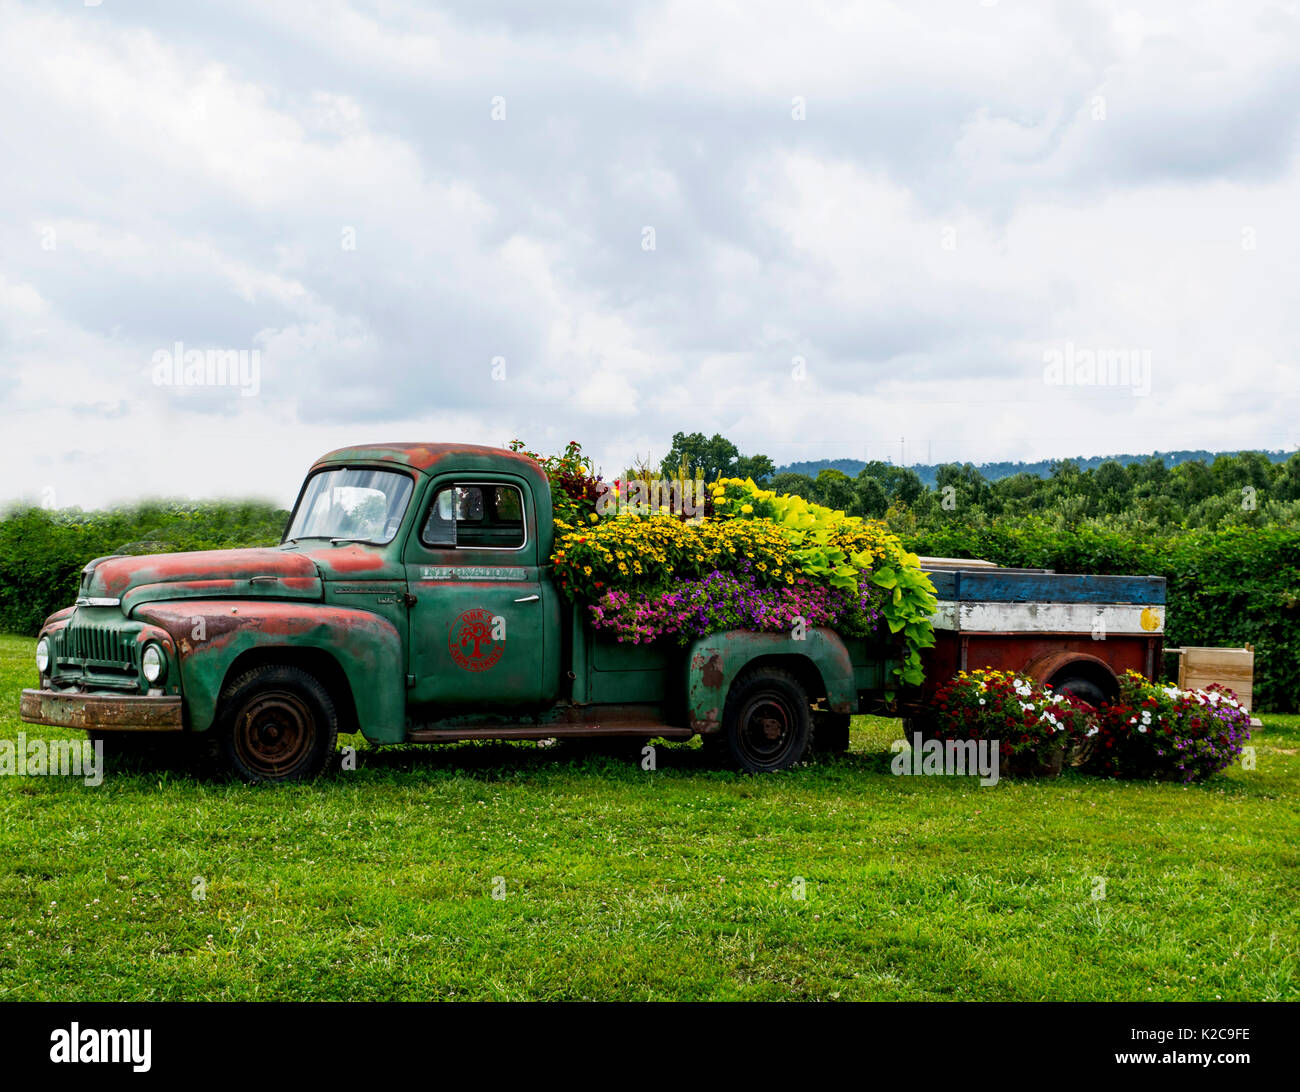 Rustic old truck planted with flowers Stock Photo